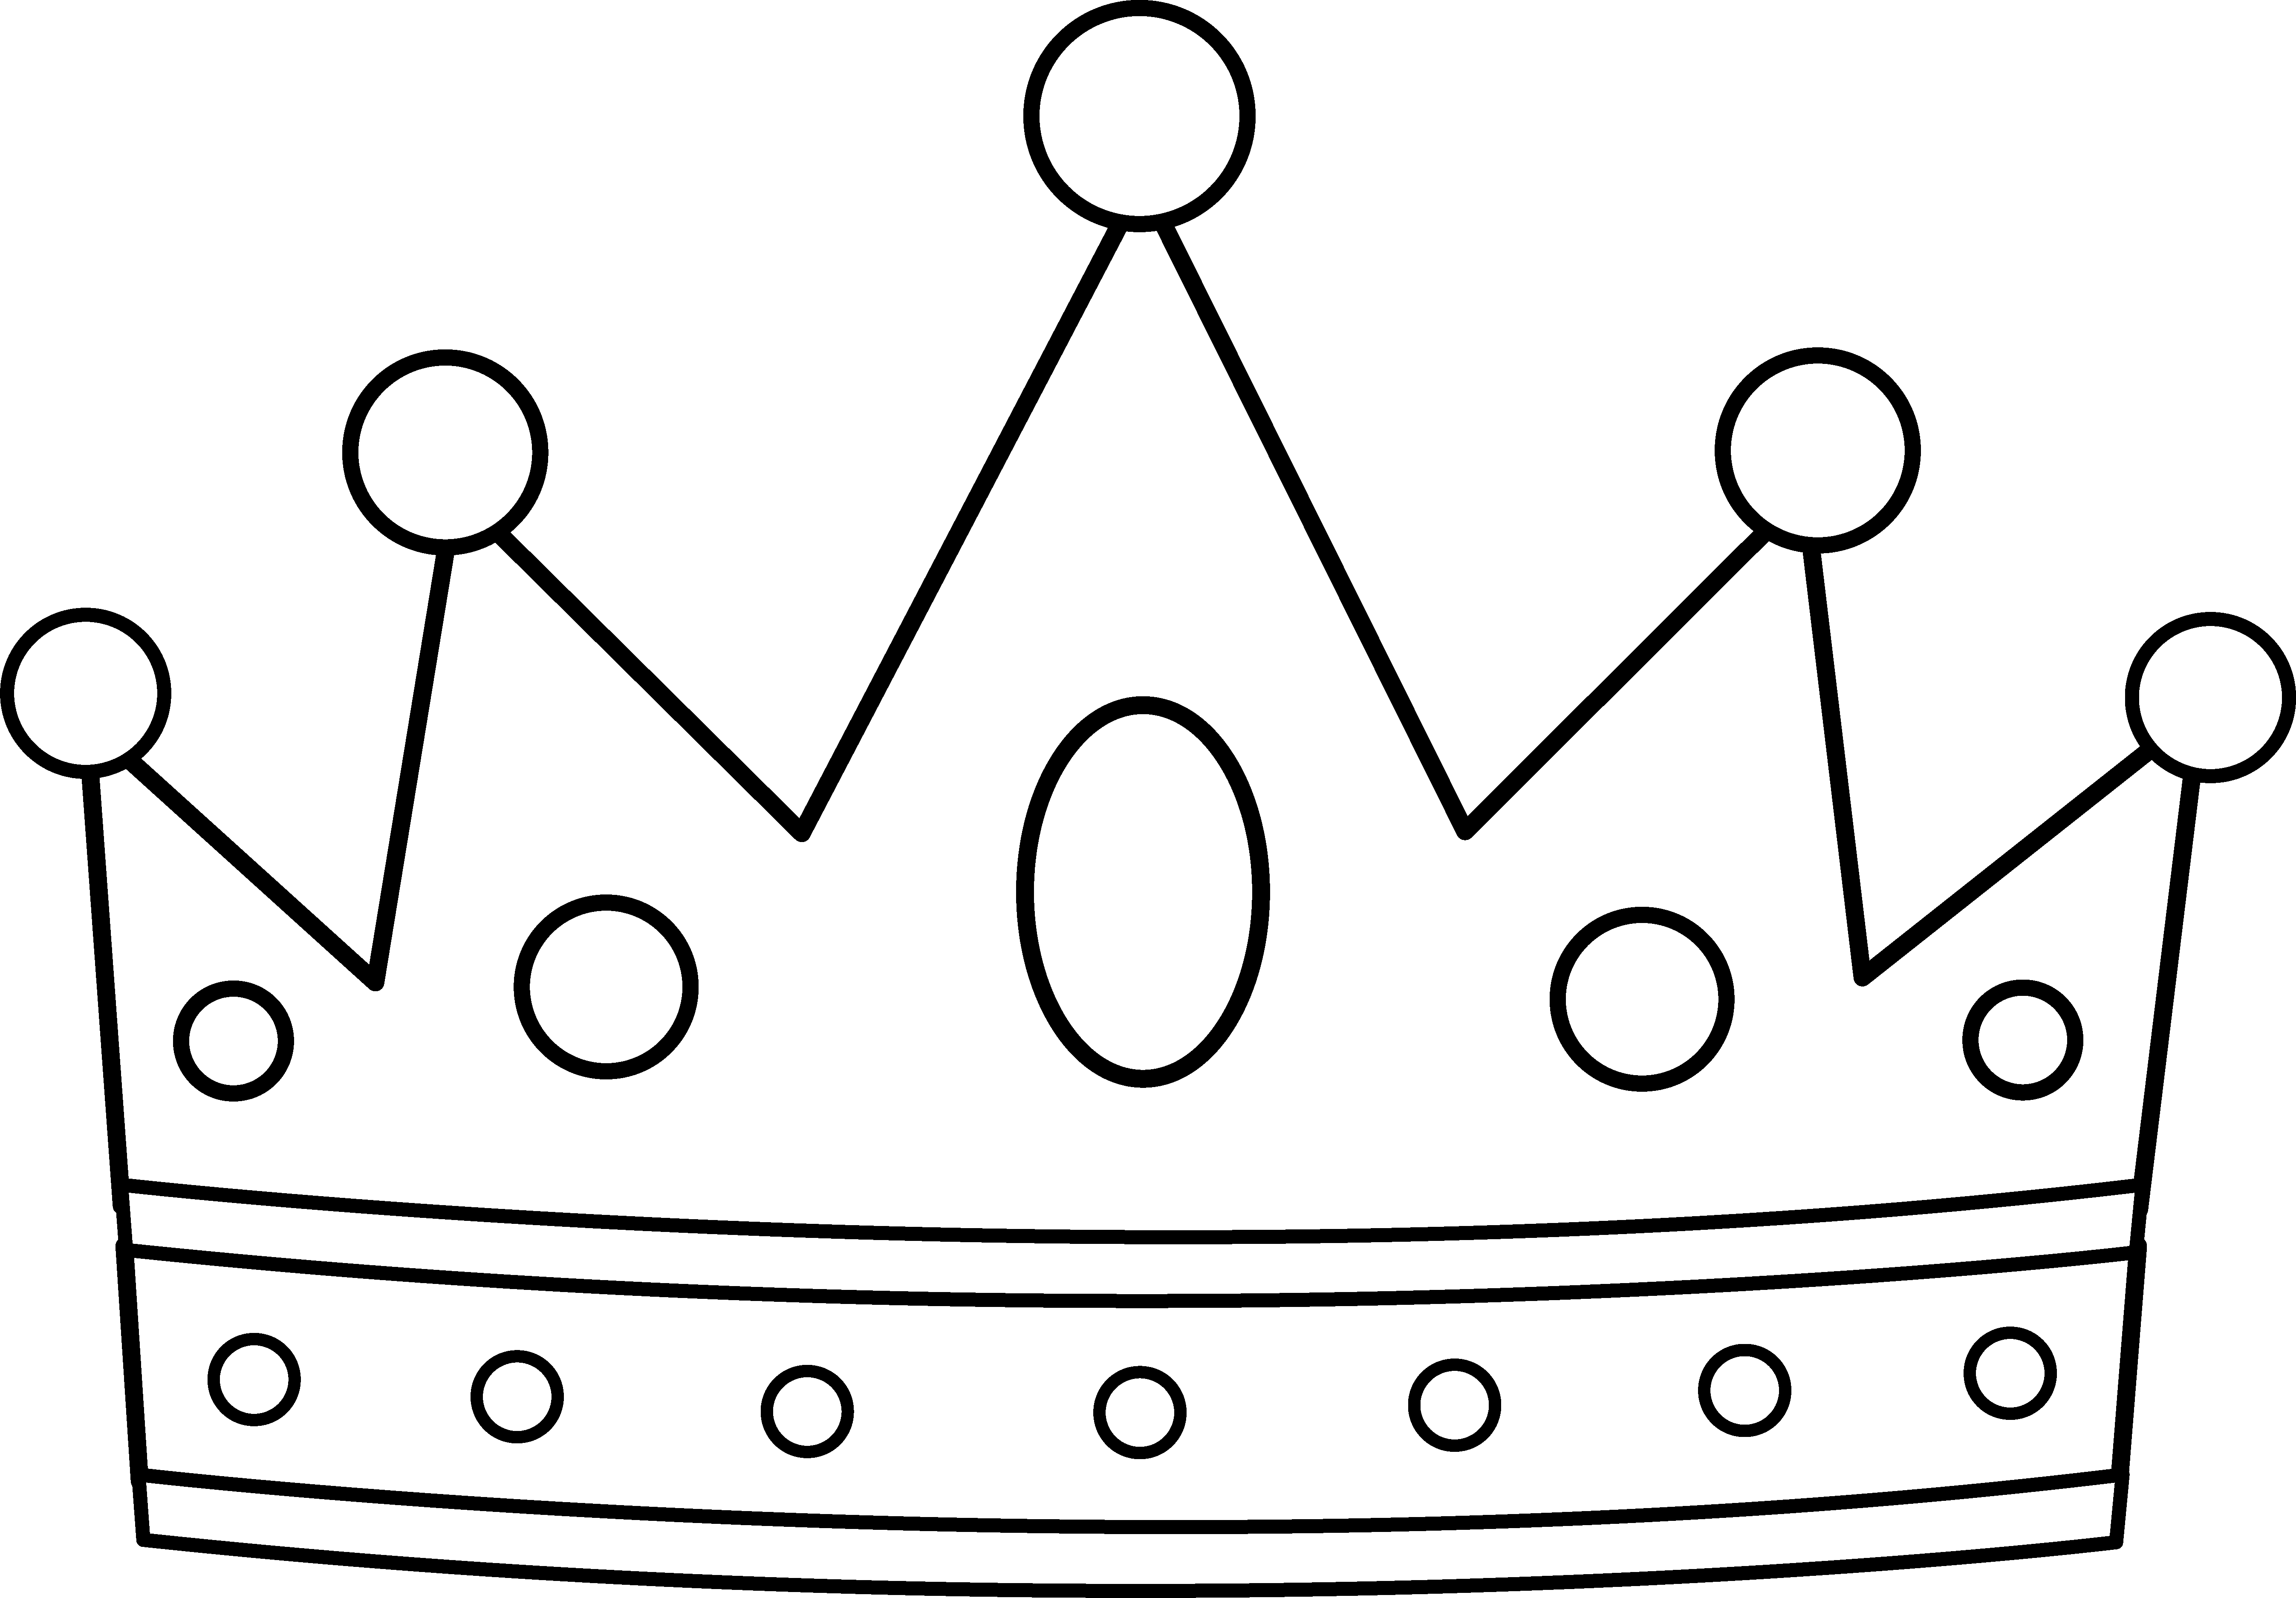 Royal Crown Coloring Page - Free Clip Art